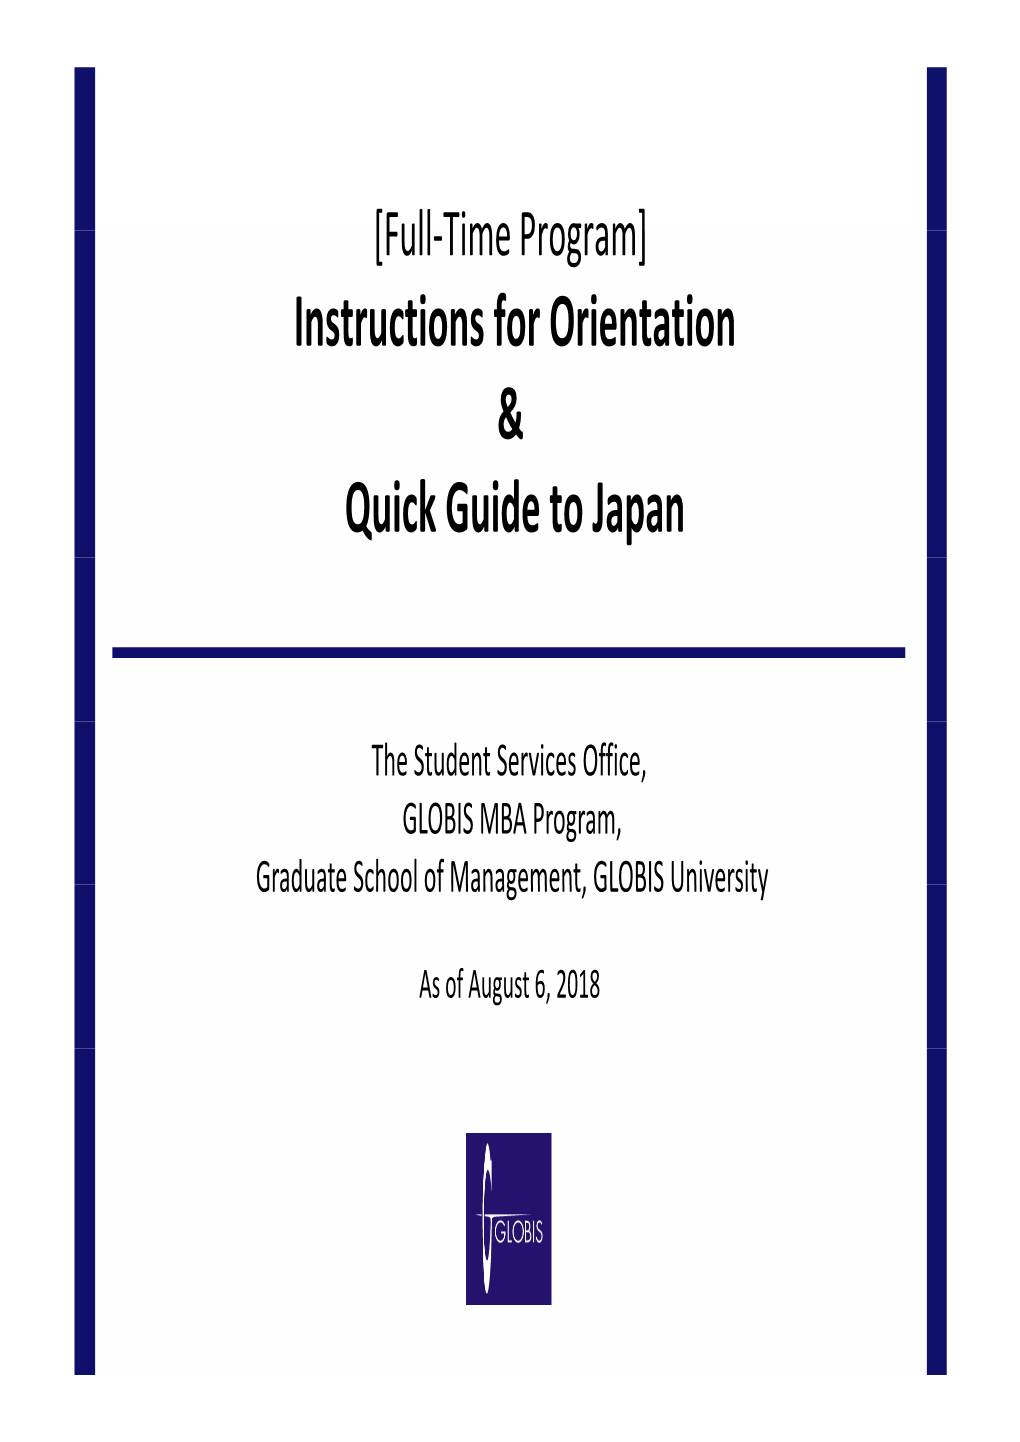 Instructions for Orientation & Quick Guide to Japan